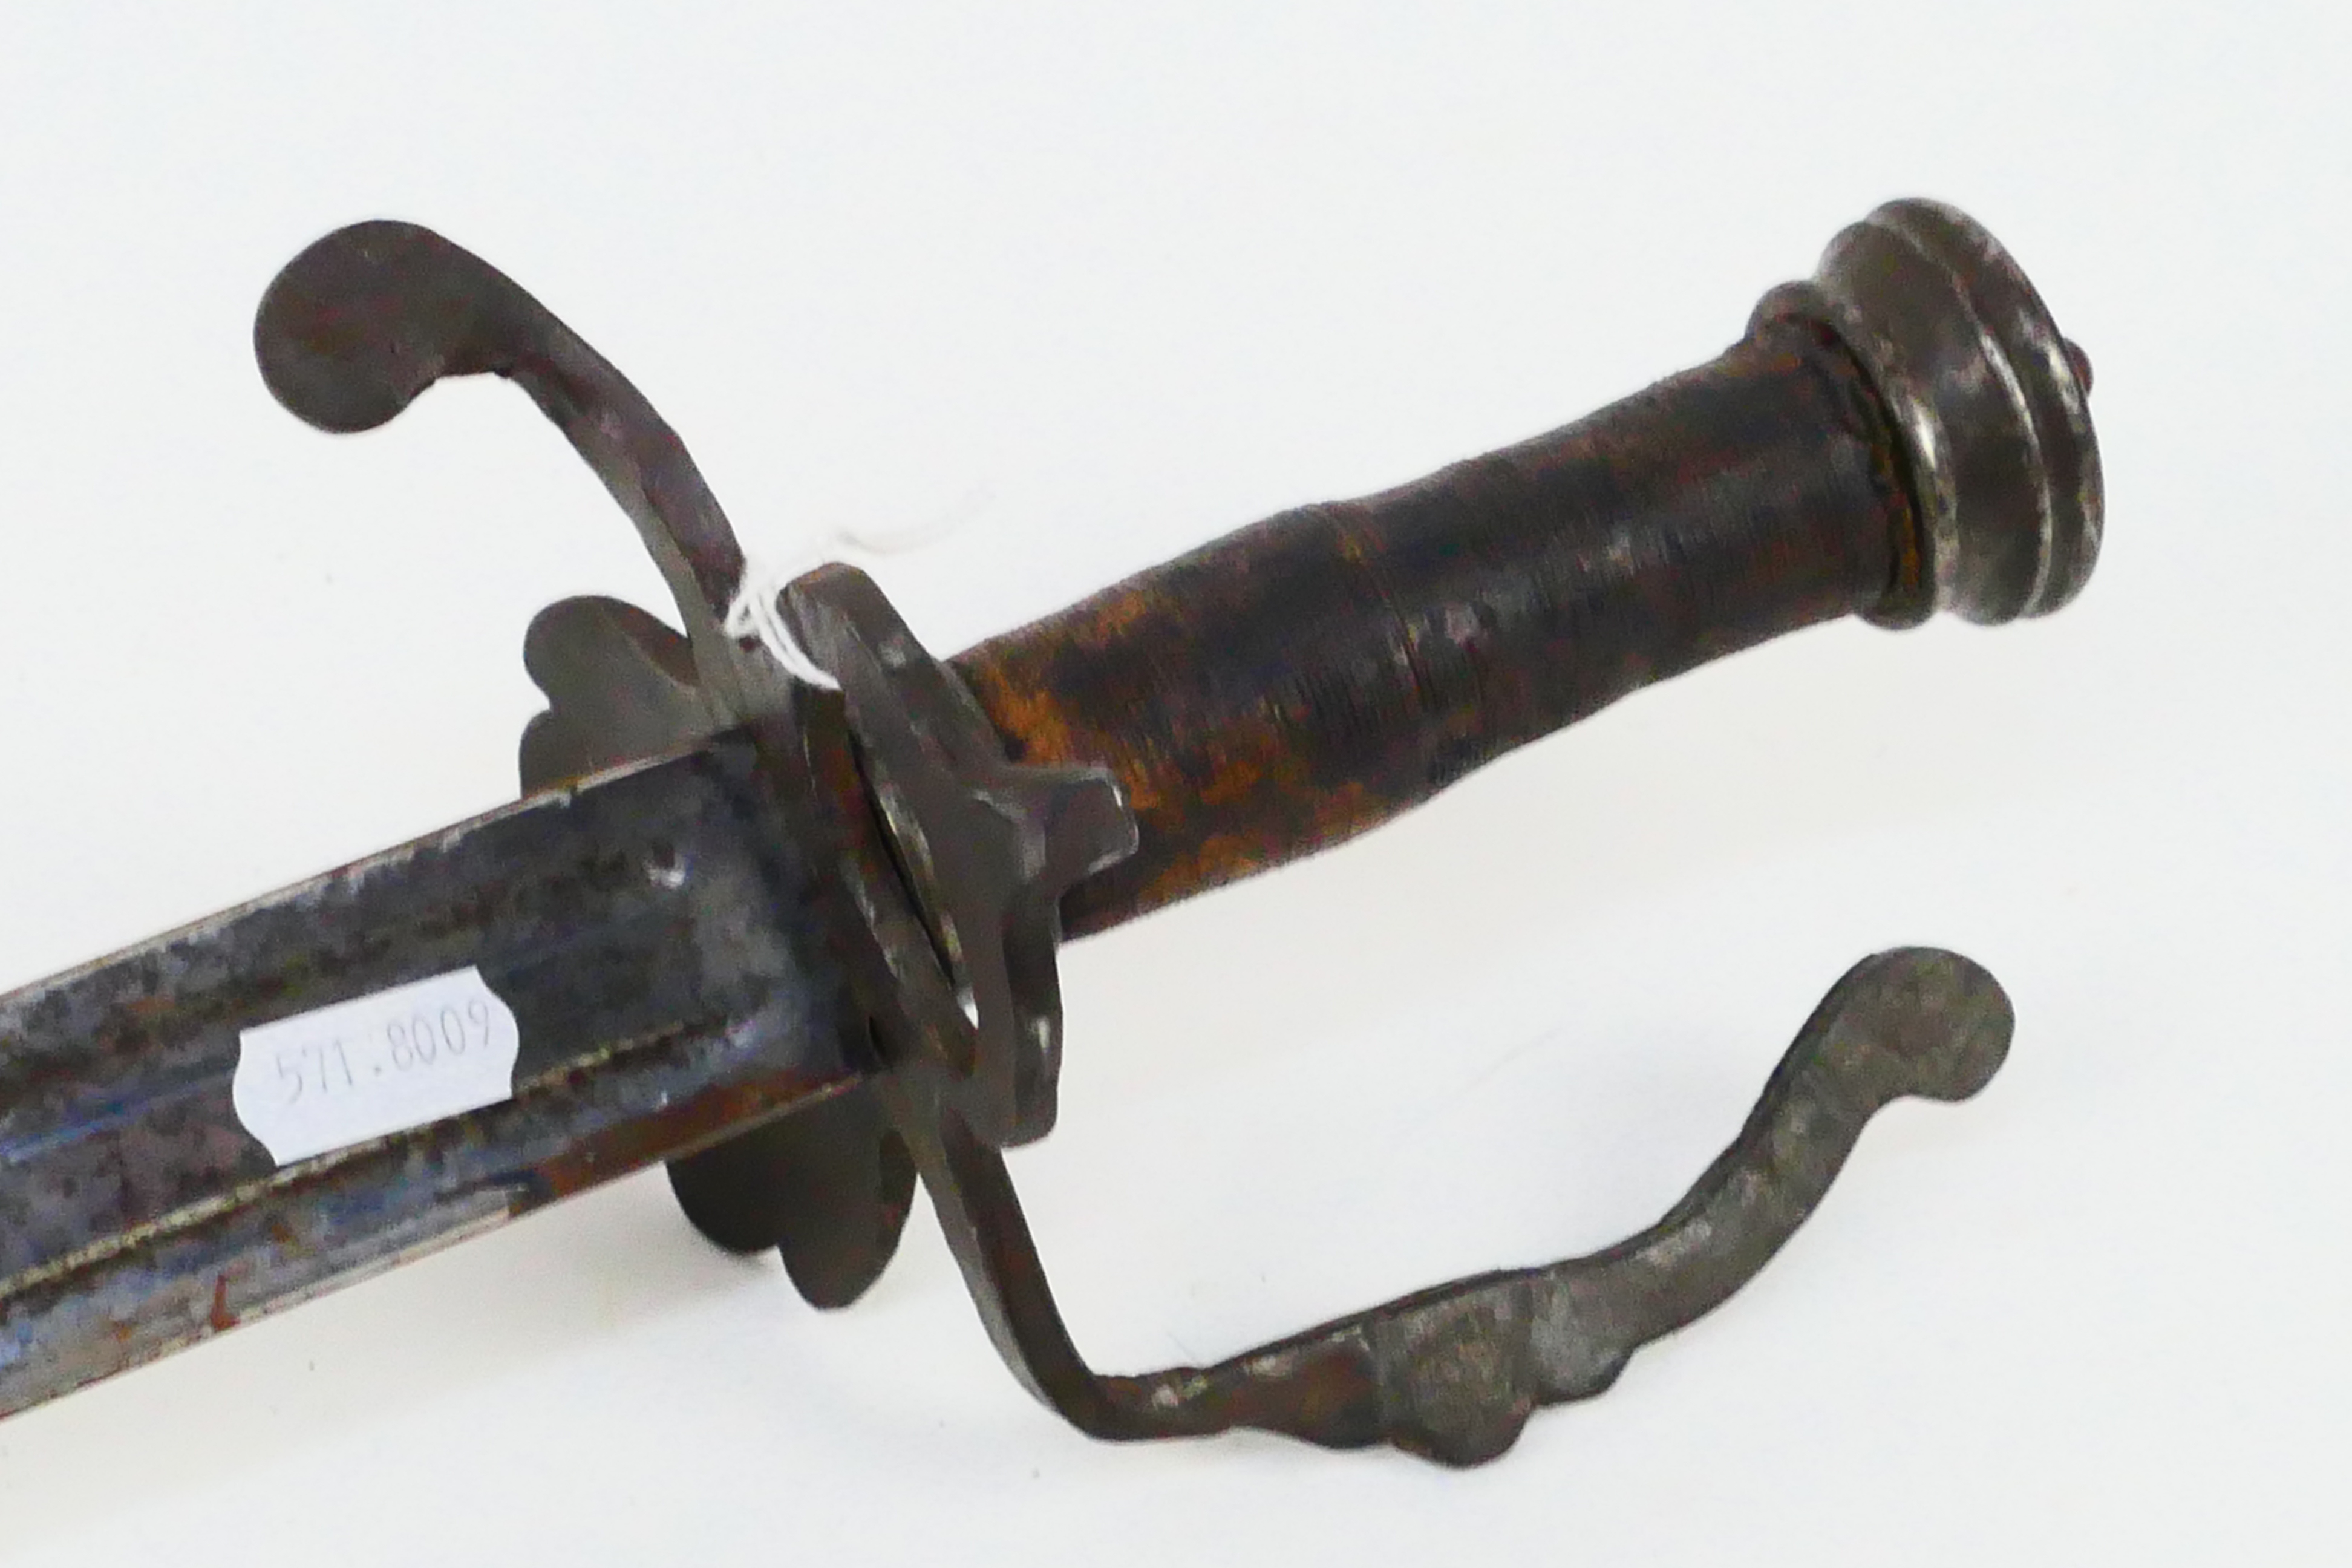 An antique hunting short sword, probably 18th century, iron shell guard, 62 cm (l) blade. - Image 5 of 7